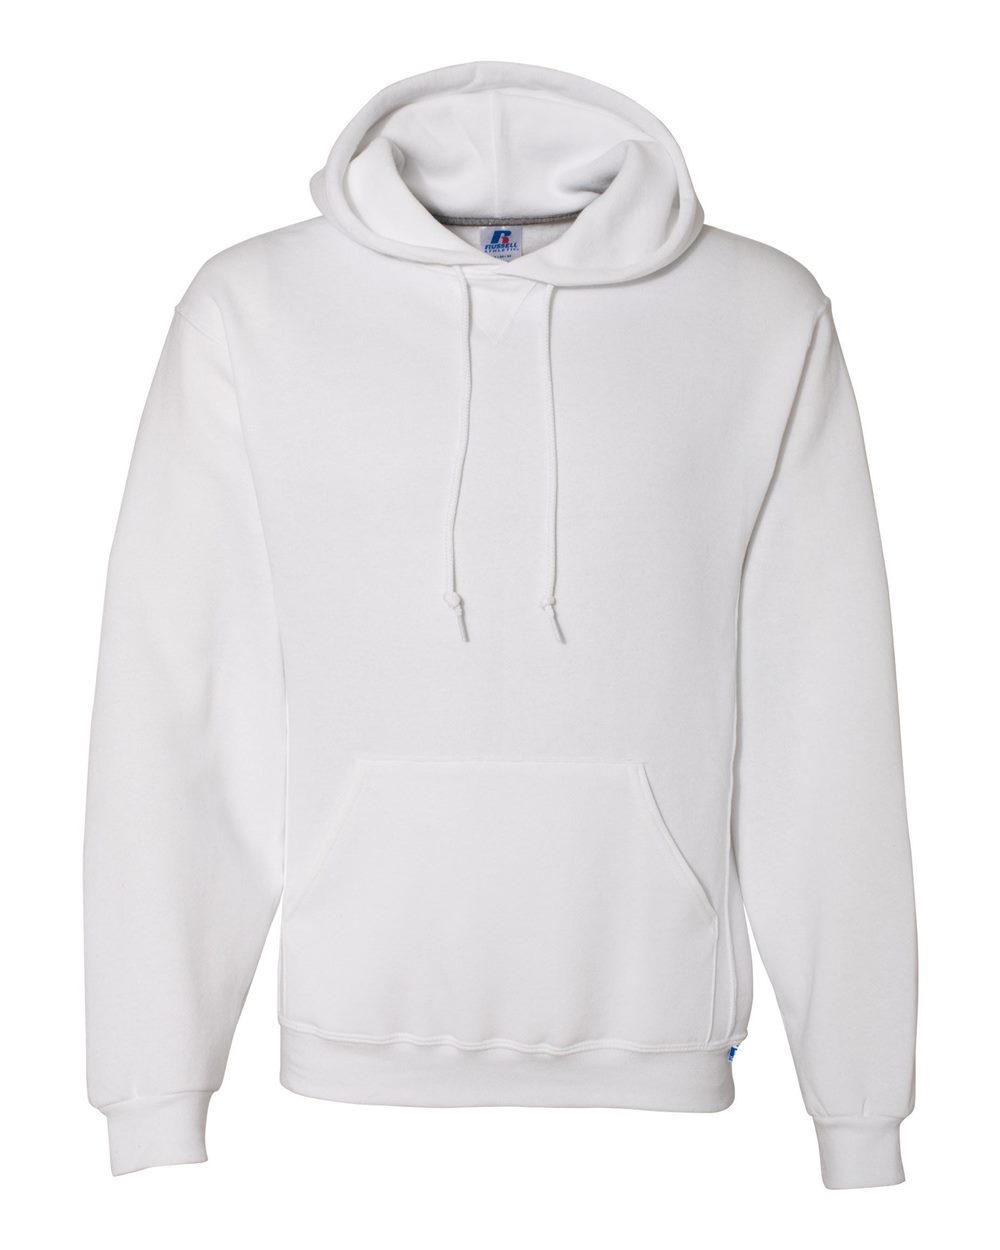 Russell Athletic Blank Plain Hooded Pullover Sweatshirt 695HBM up to ...